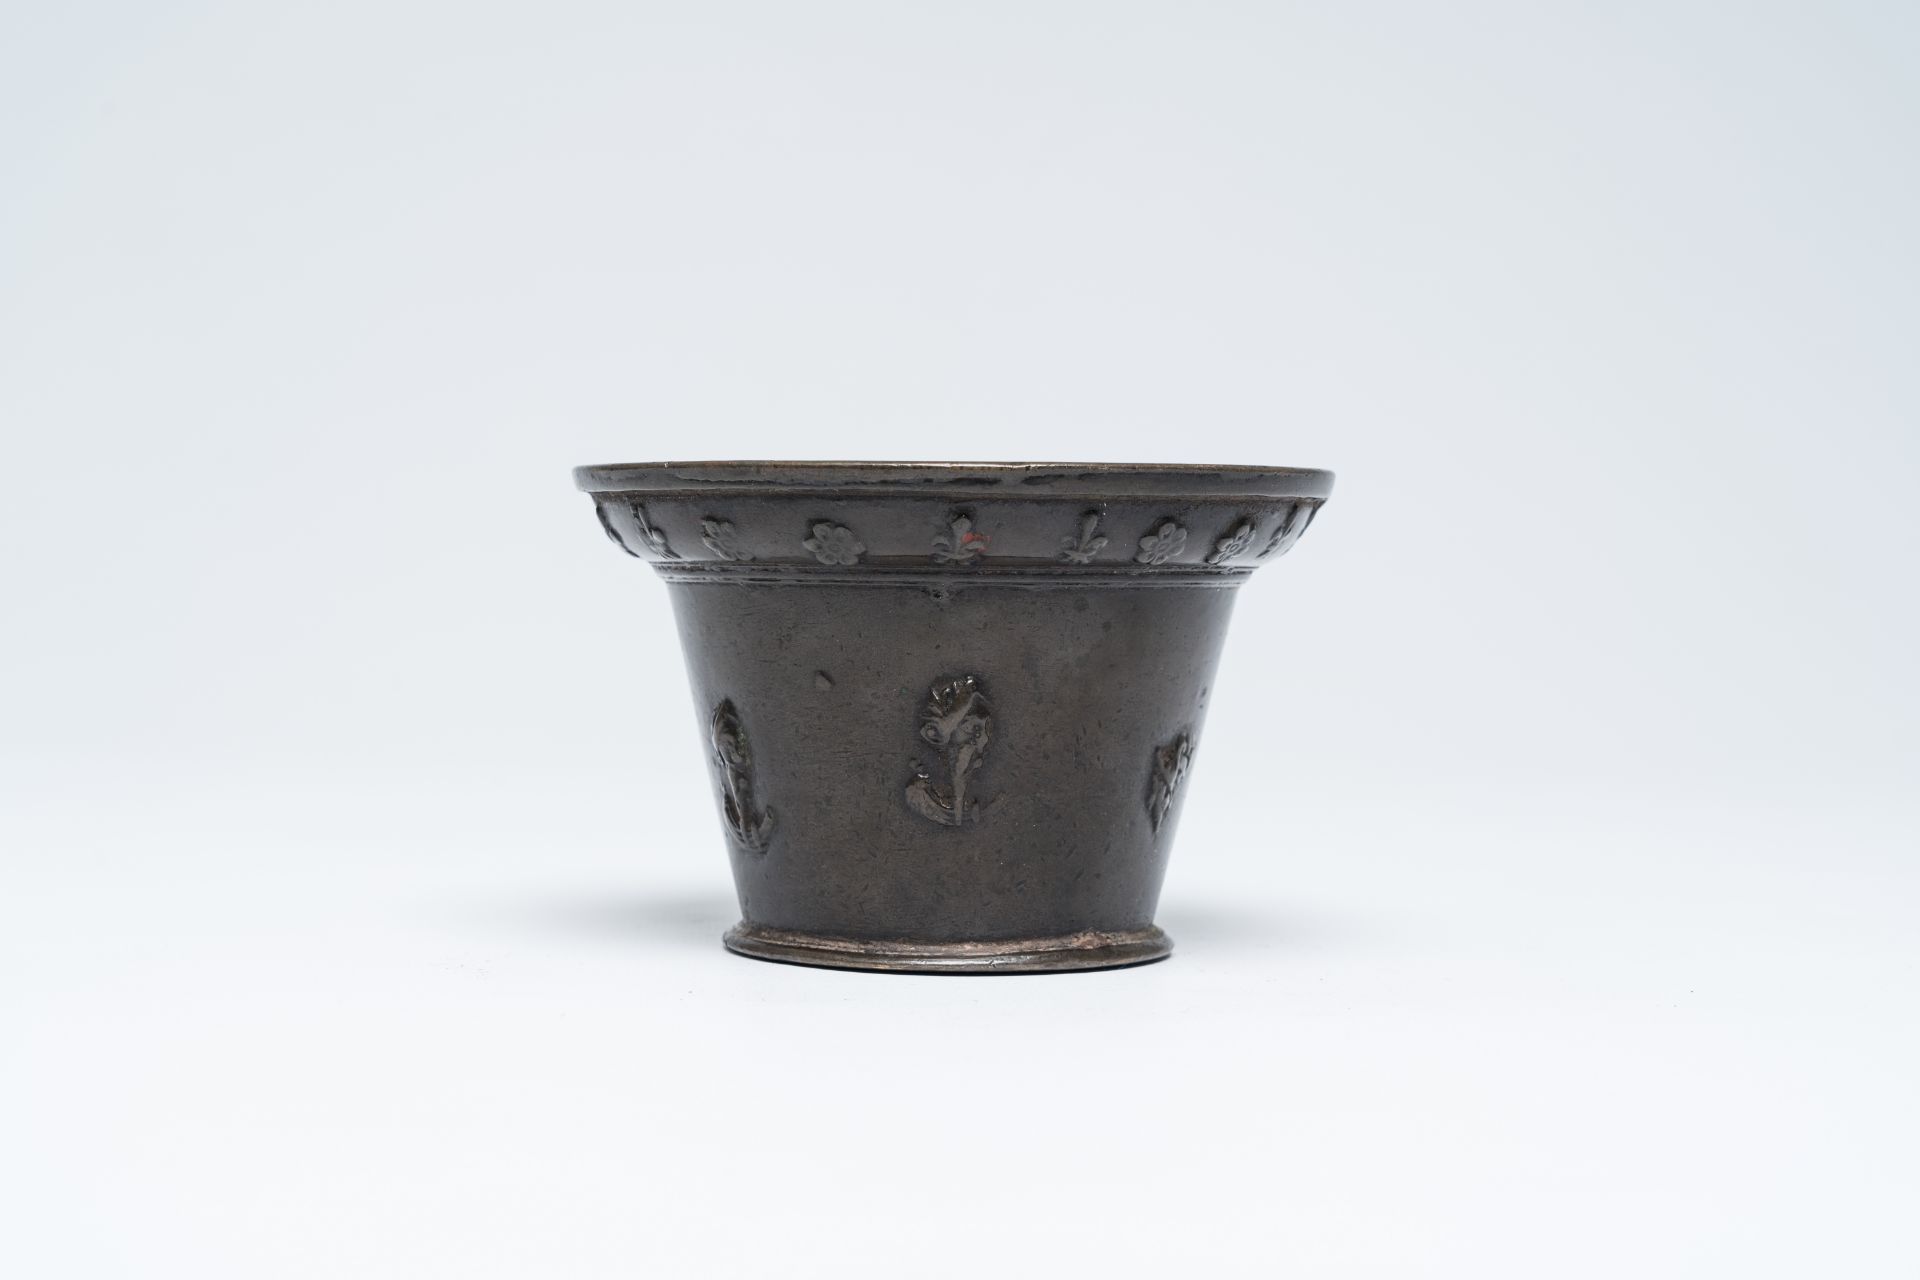 A French bronze 'mascarons' mortar, probably Lyon, 17th C. - Image 2 of 7